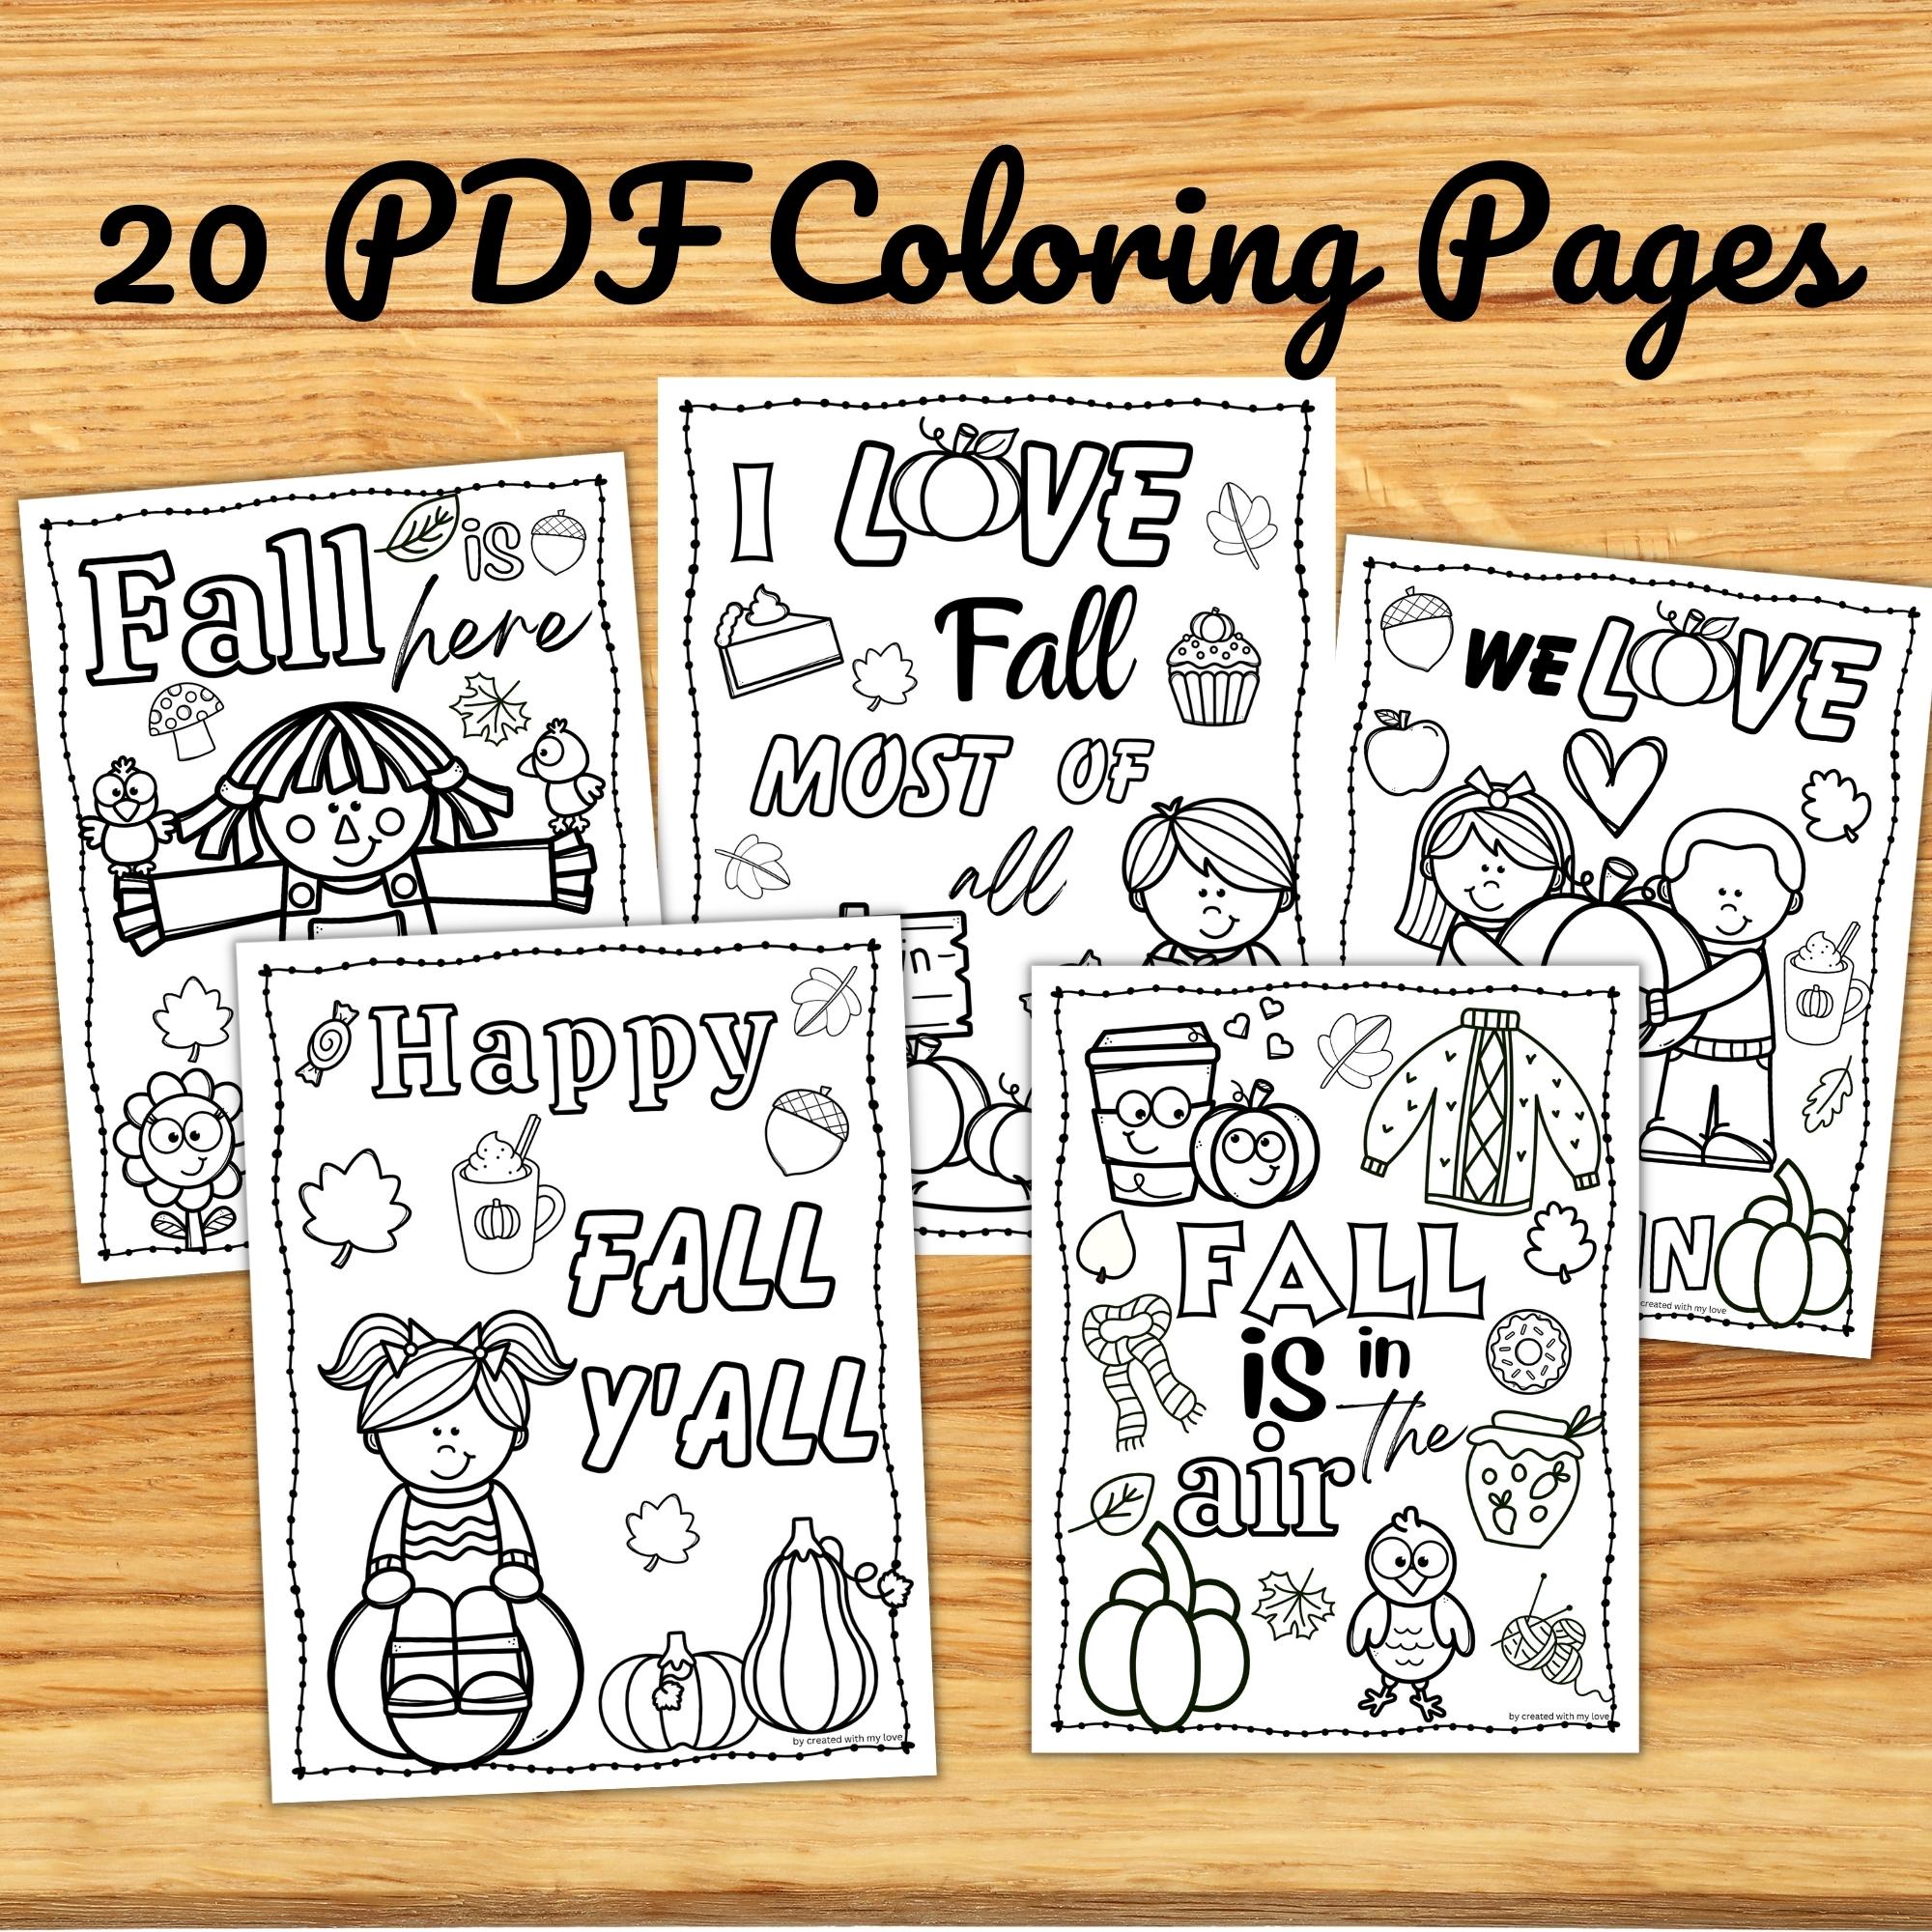 Fallautumn pumpkin coloring pages september coloring sheets made by teachers